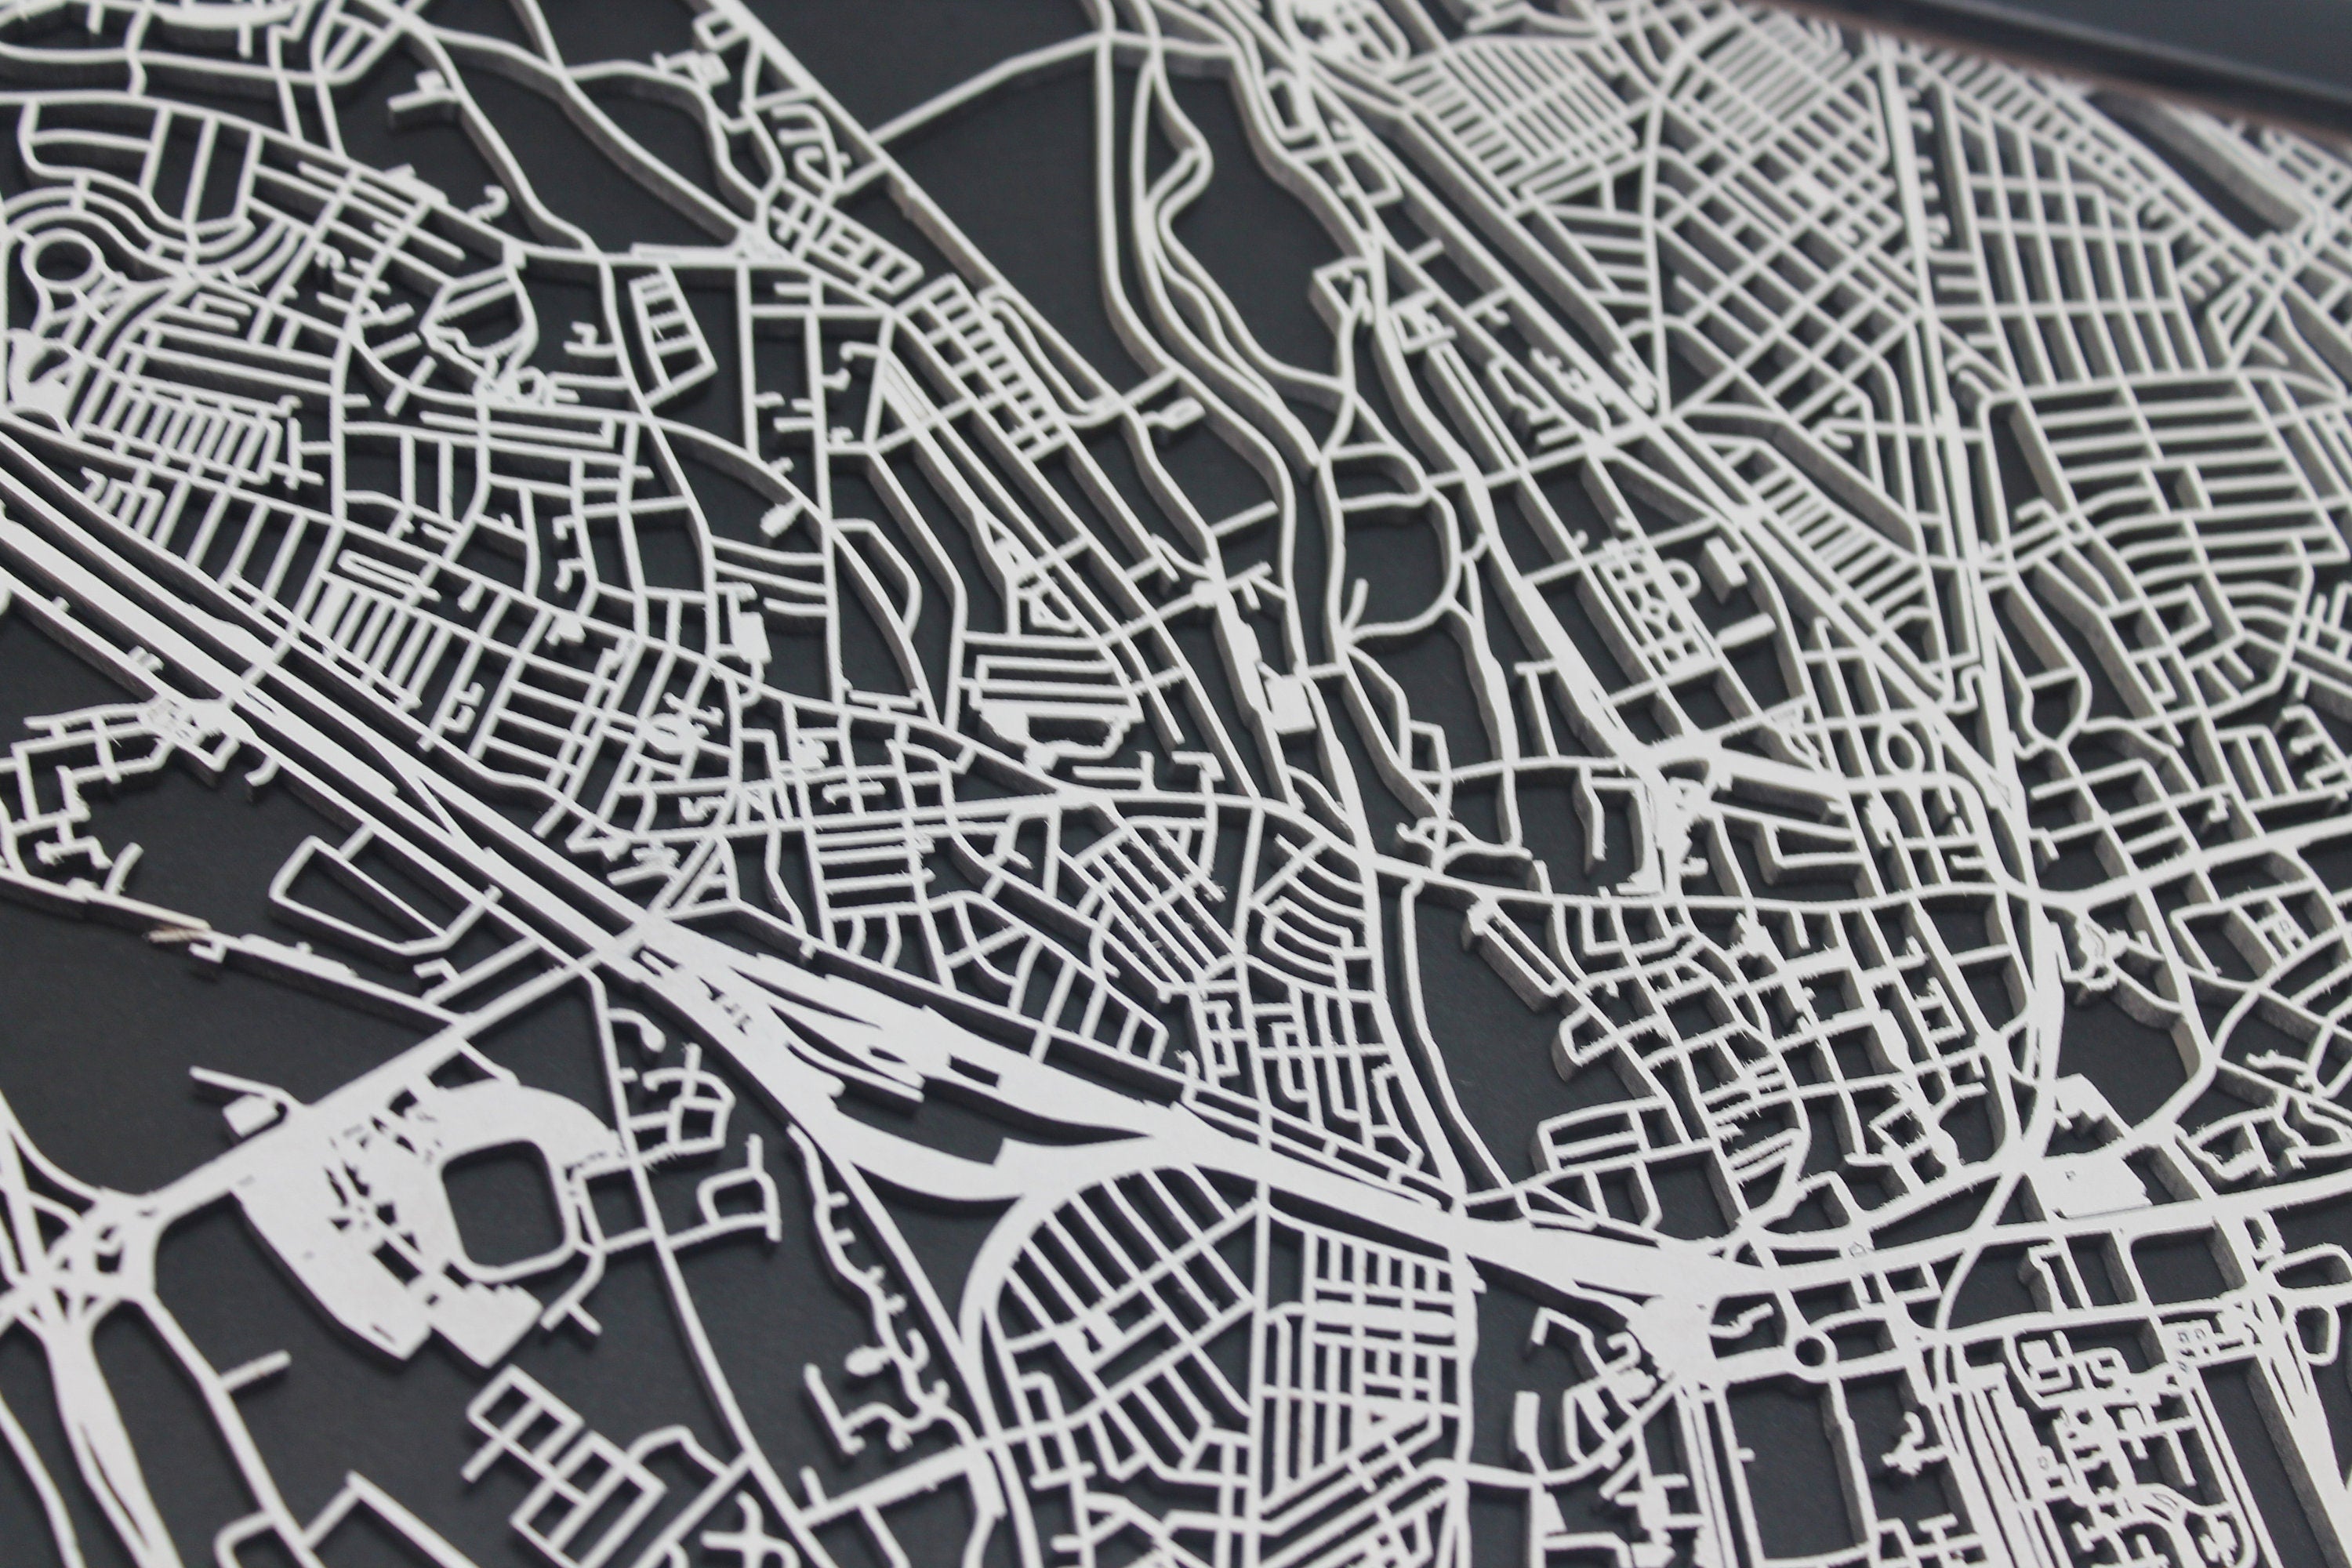 Cardiff Wood Map Laser Cut Street Maps Wooden Map